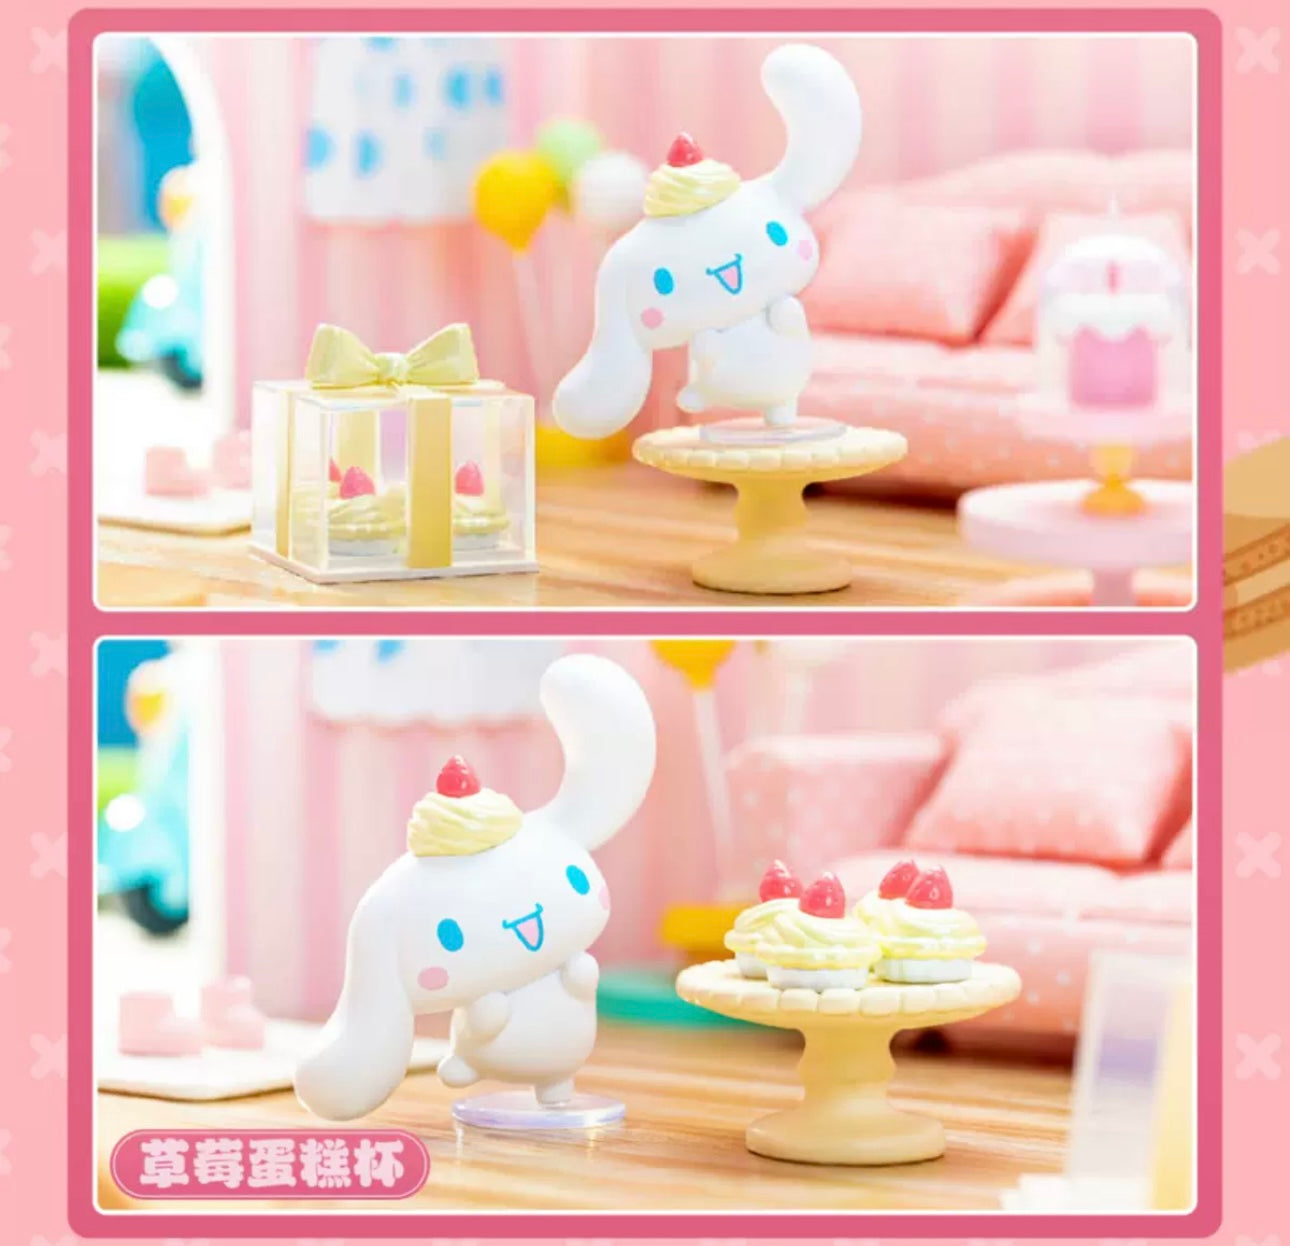 Top Toy x Sanrio Characters | Cinnamoroll Sweet Gift Birthday Series - Kawaii Collectable Toys Mystery Blind Box